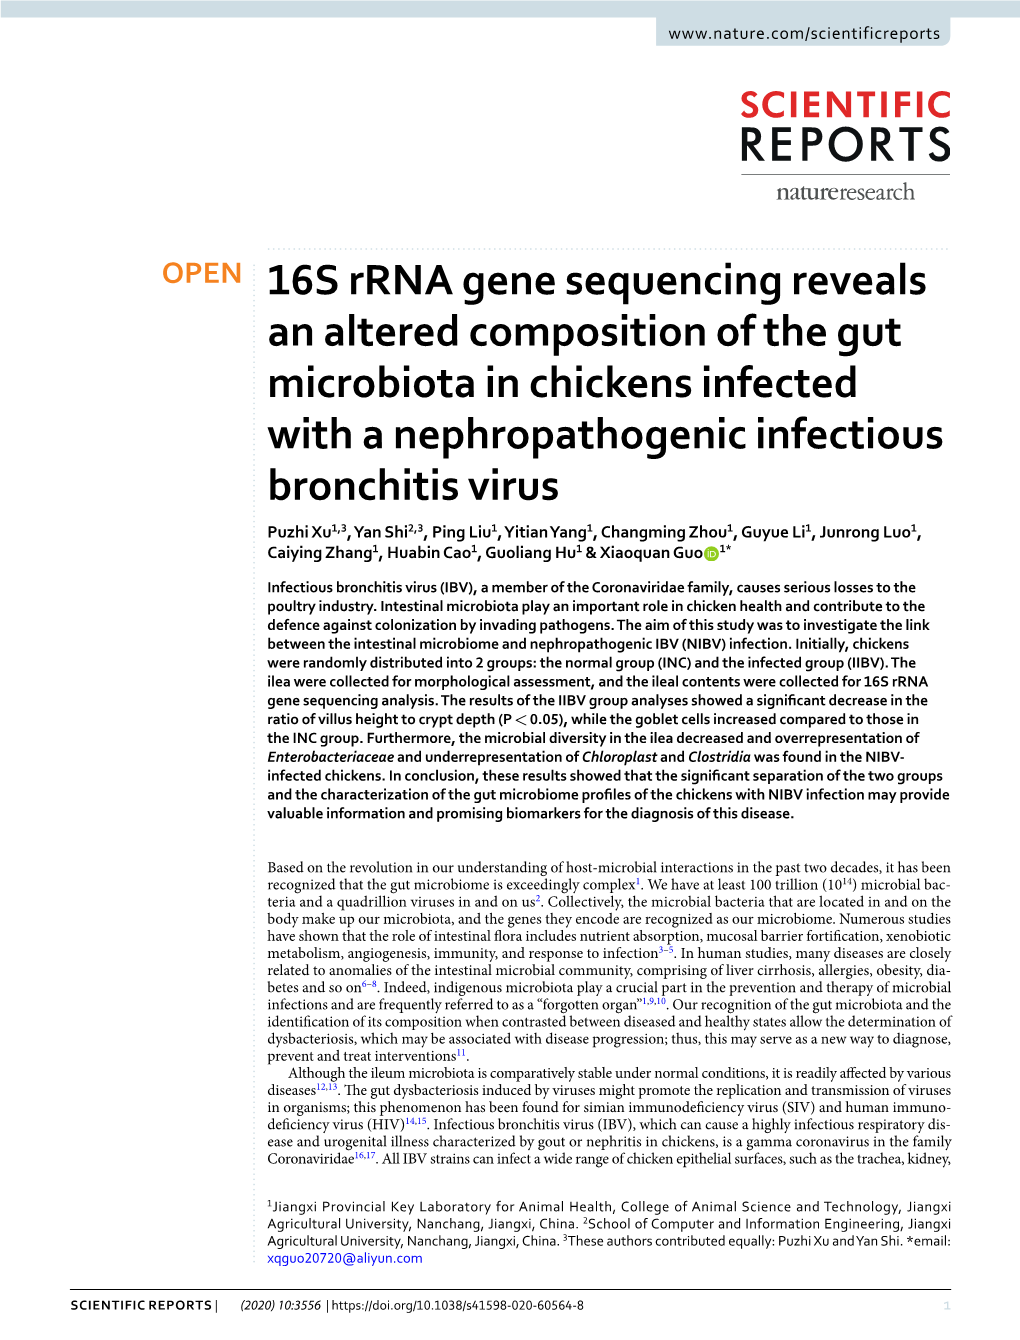 16S Rrna Gene Sequencing Reveals an Altered Composition of the Gut